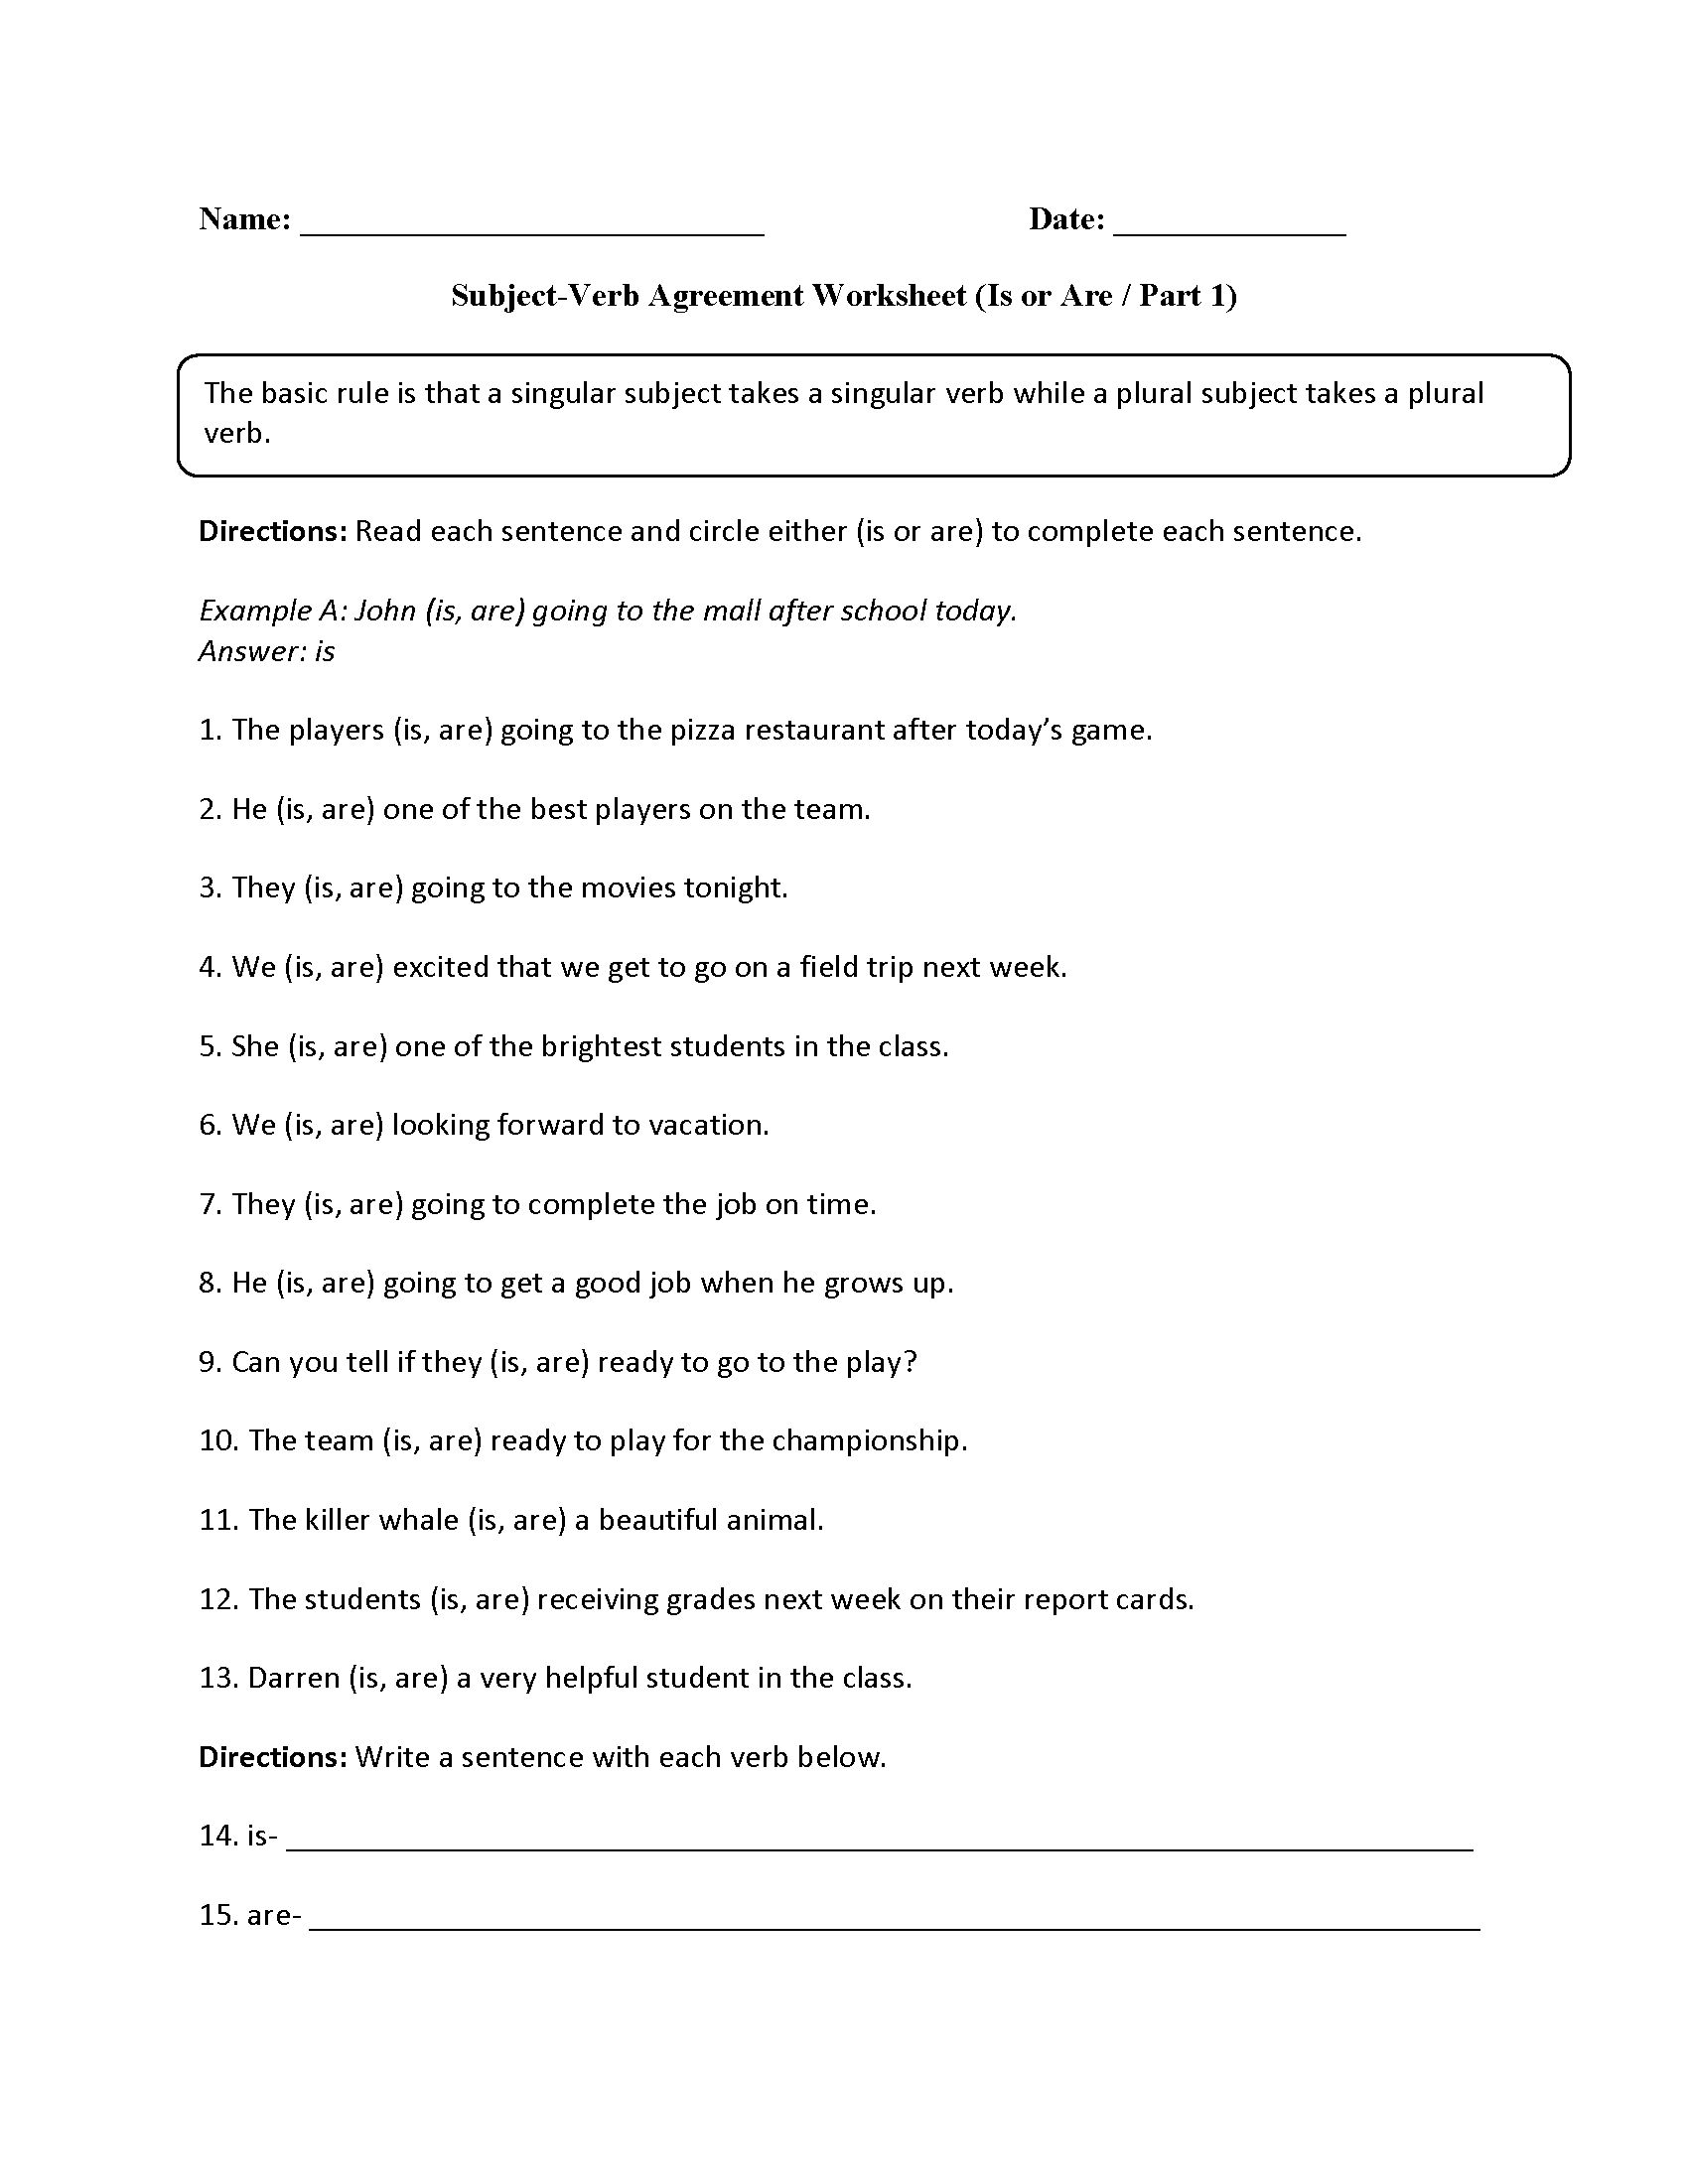 Verbs Worksheets  Subject Verb Agreement Worksheets And Grade 9 English Worksheets Free